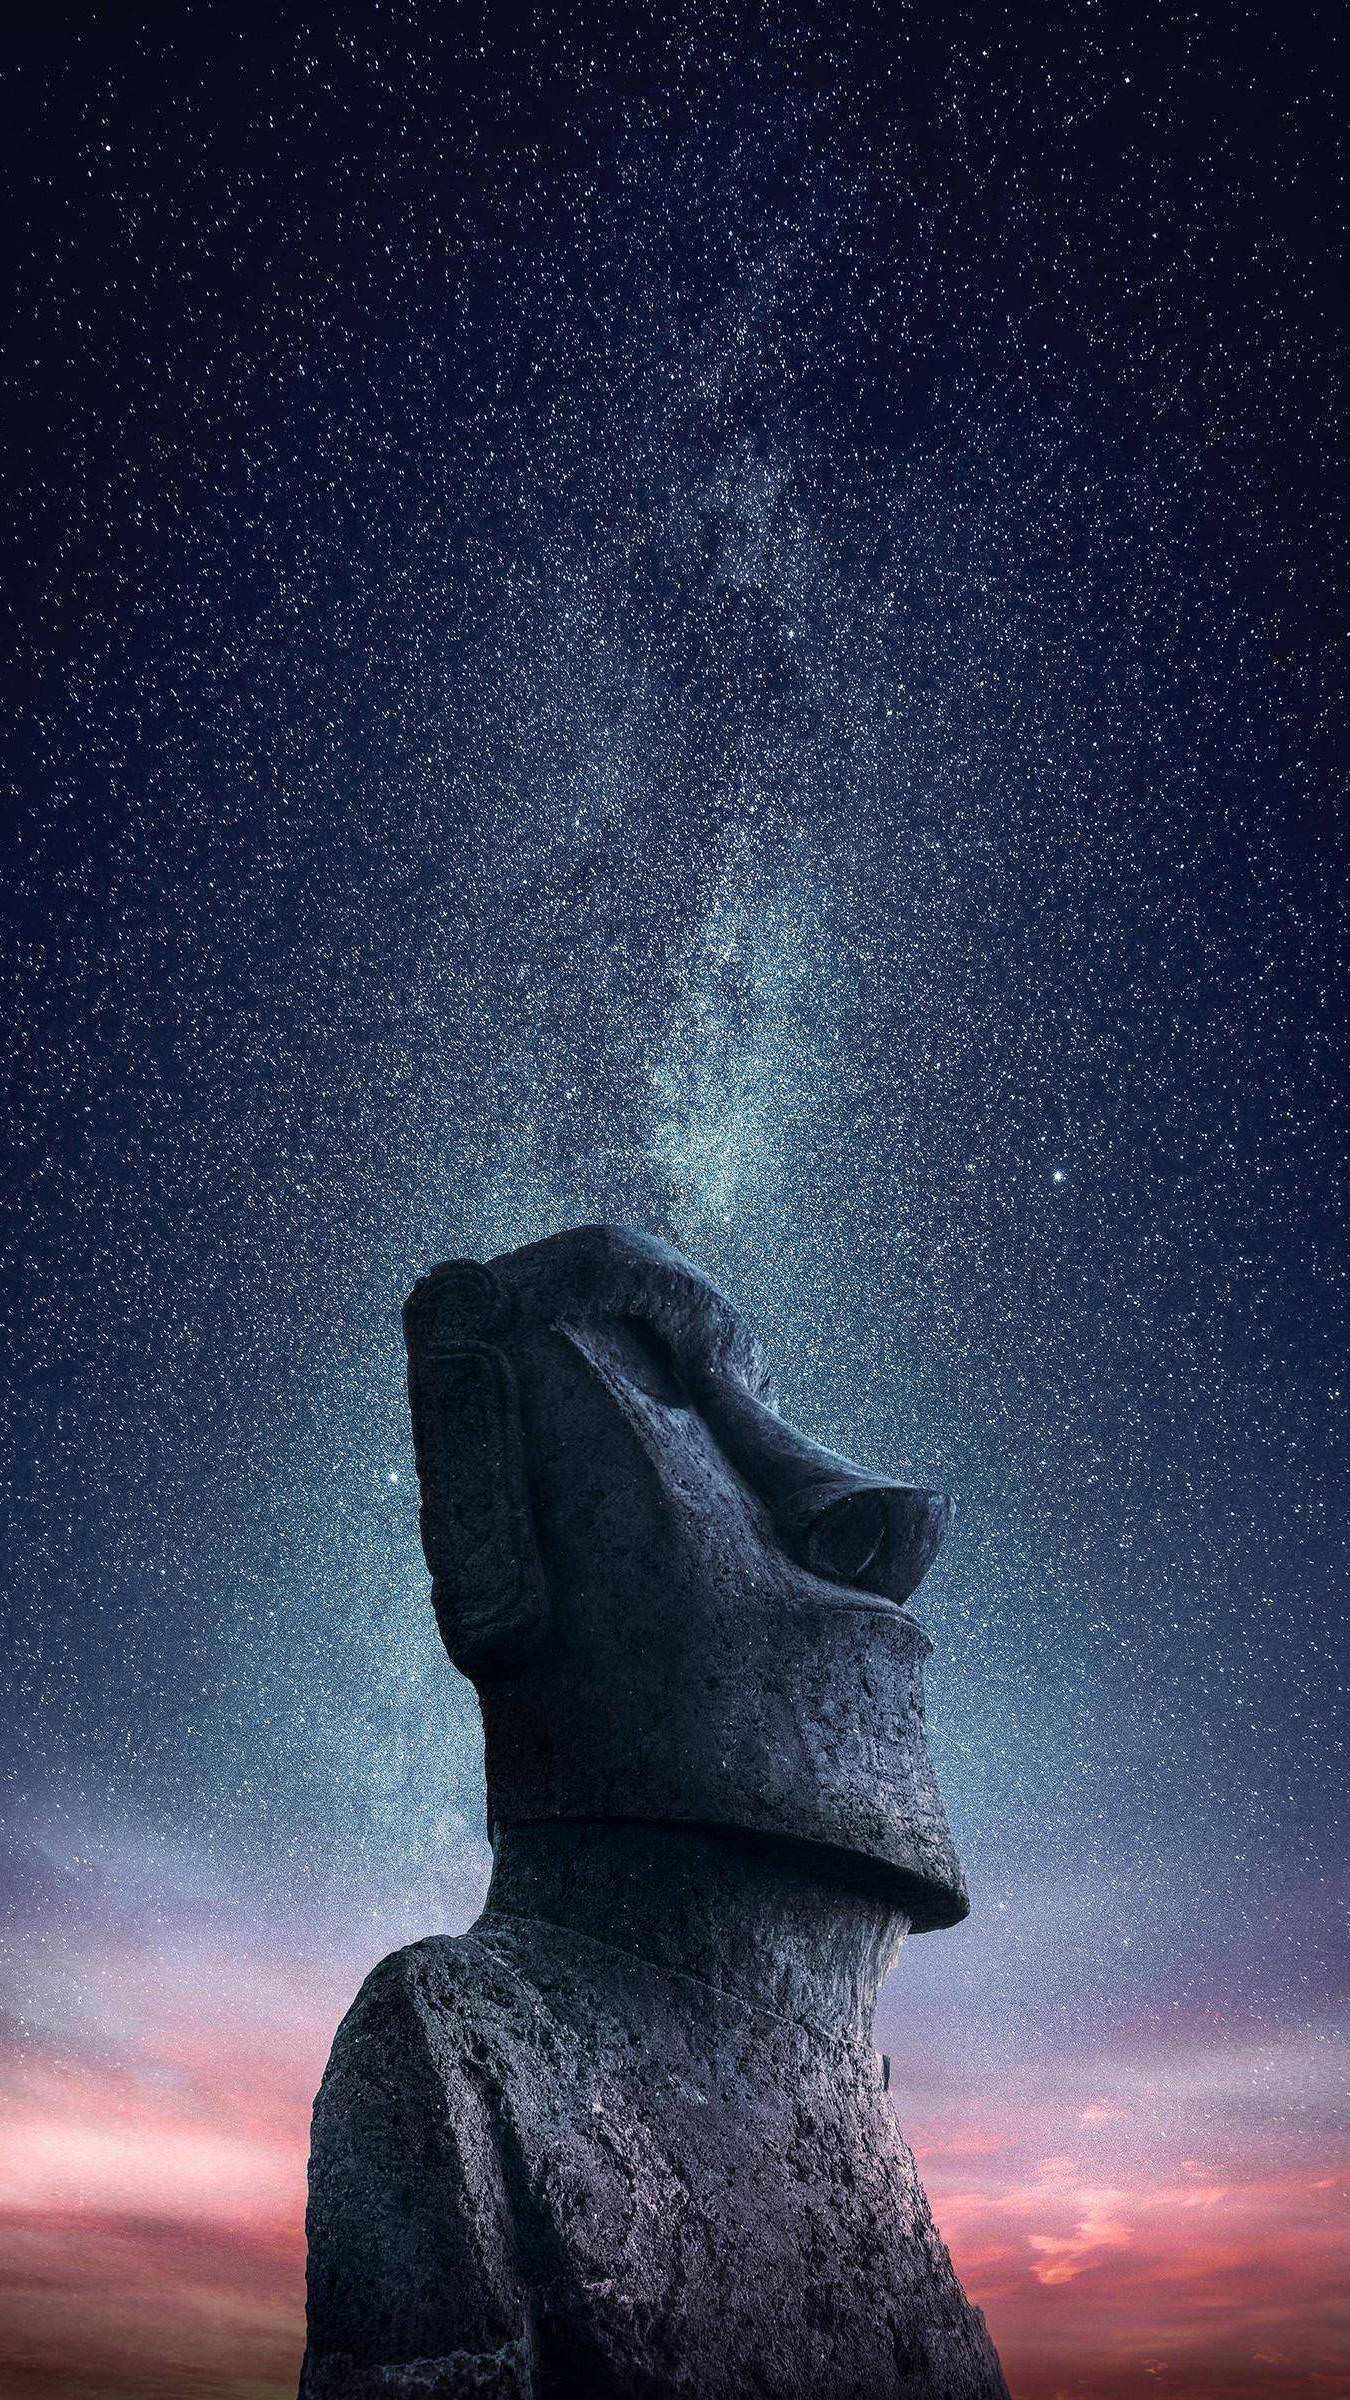 Wallpaper I made of the Easter Island photo